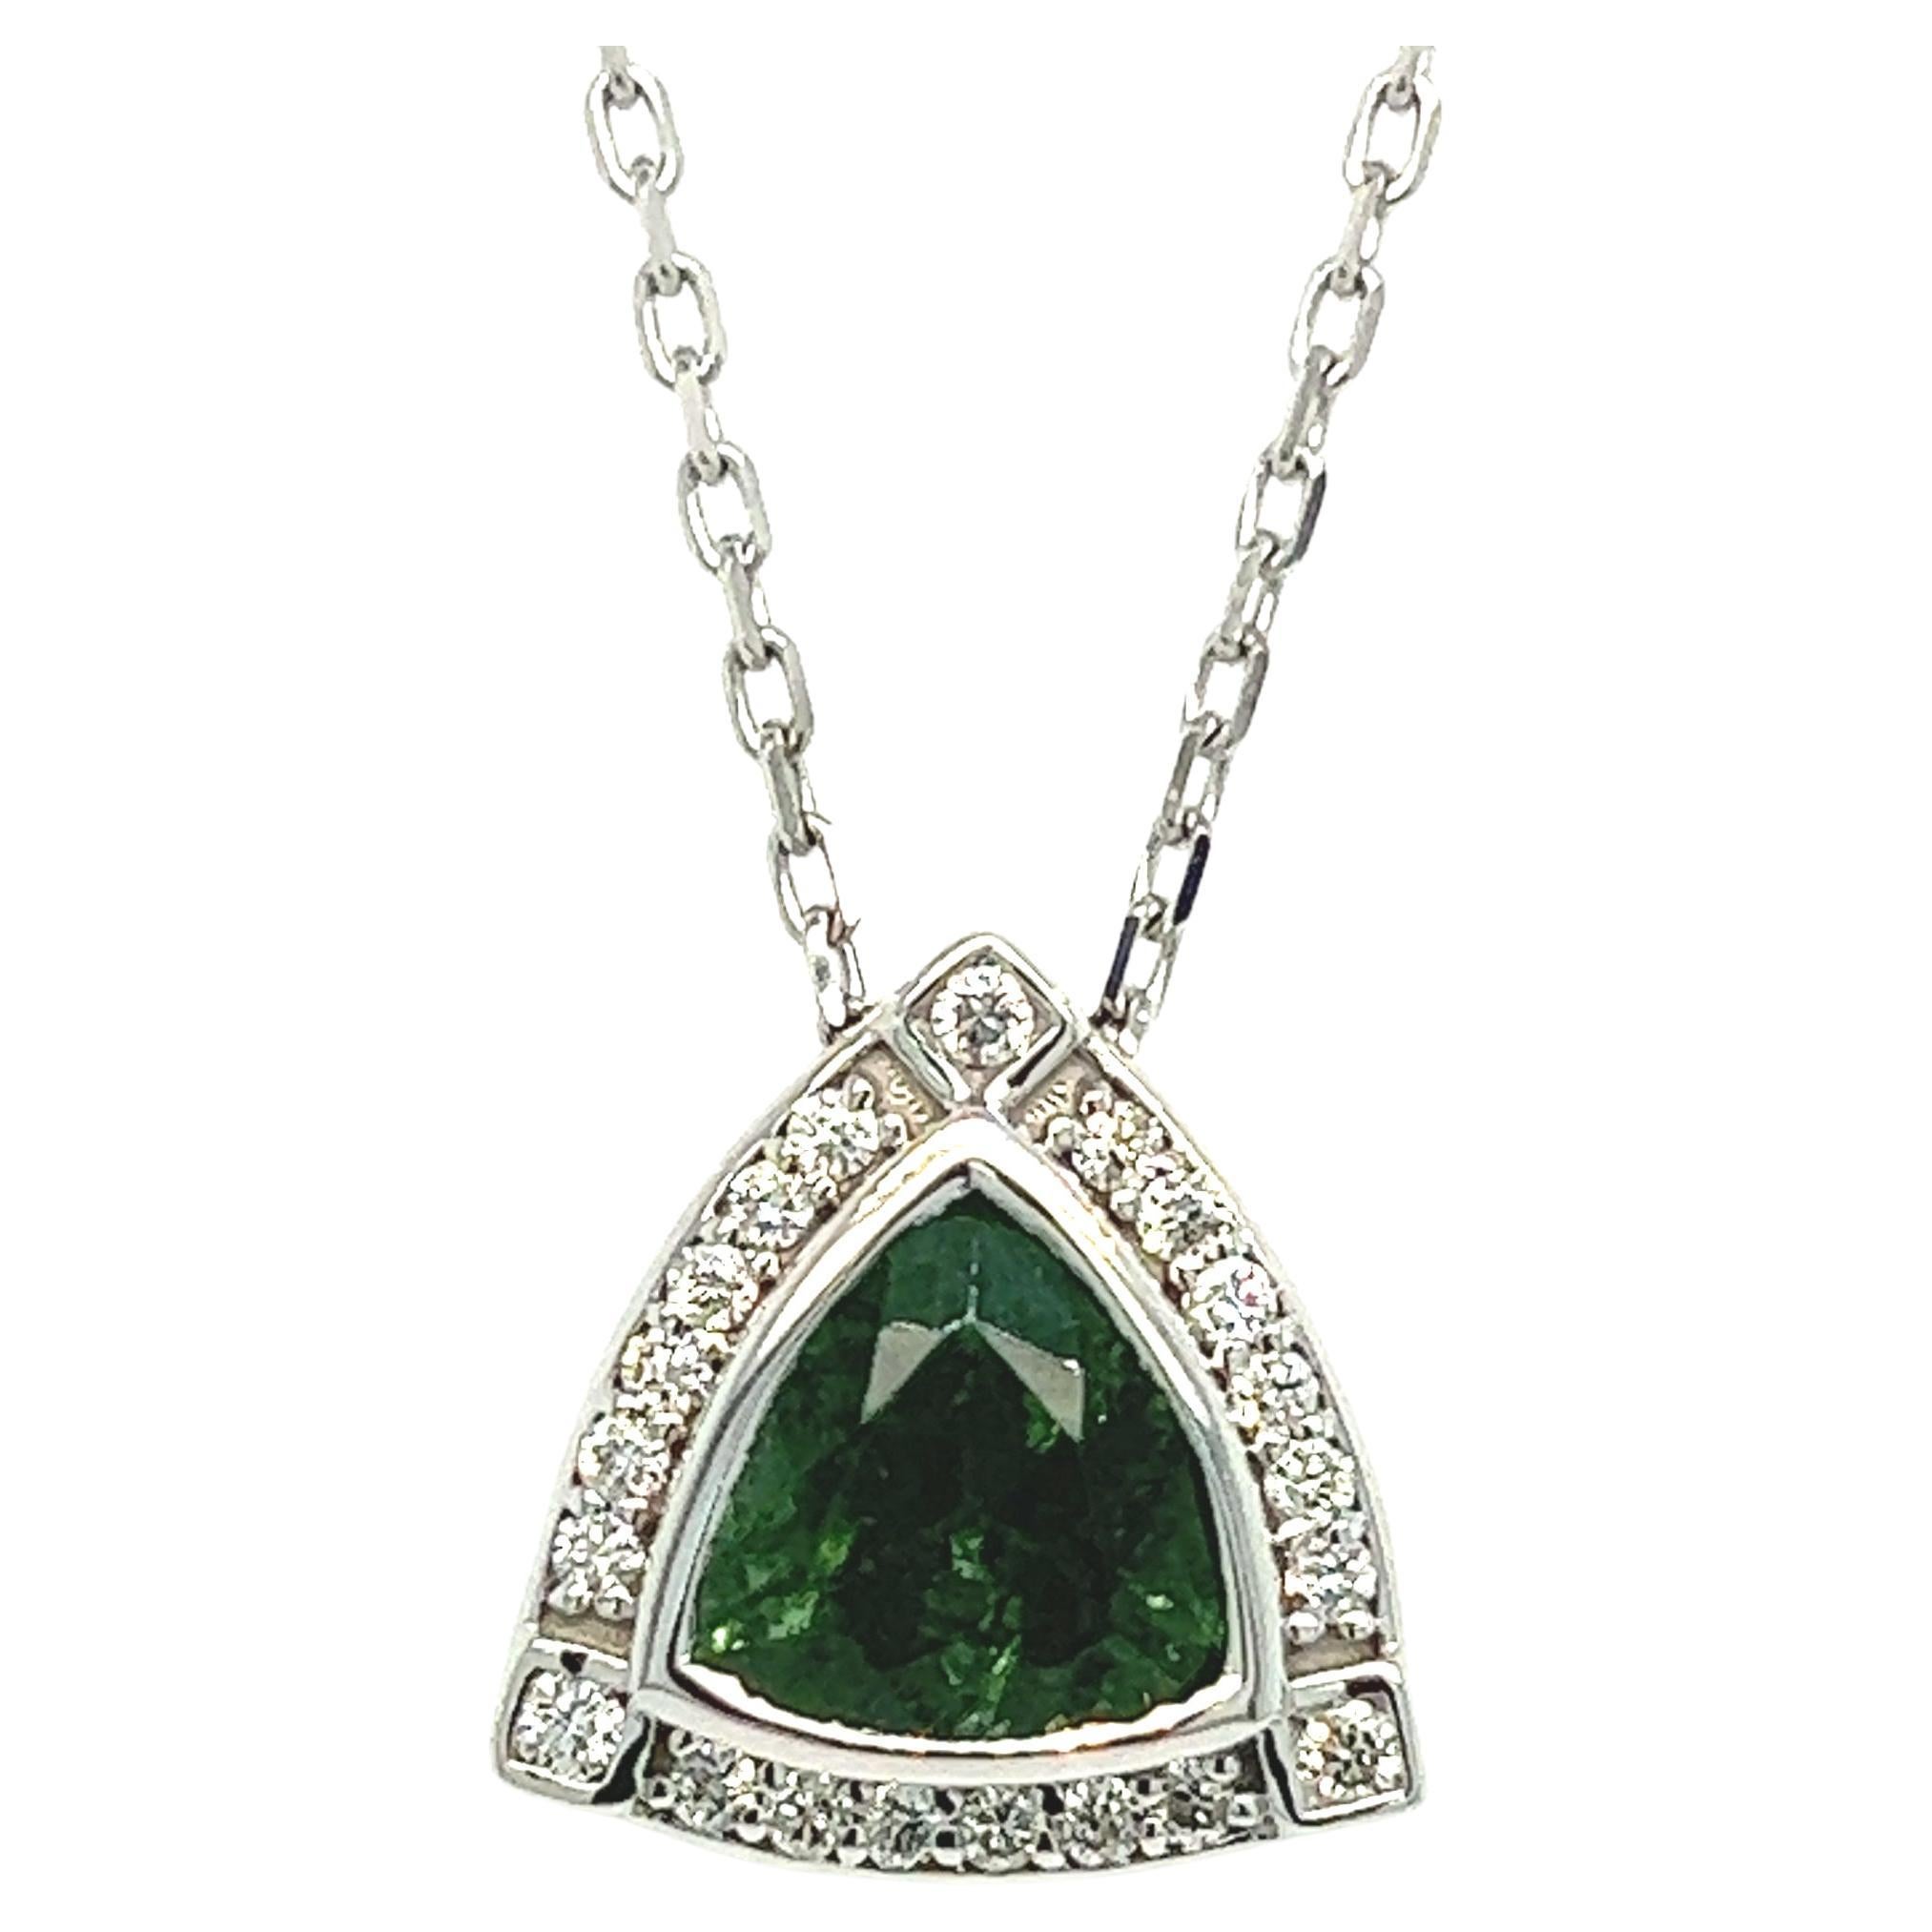 Natural Tourmaline Diamond Pendant Necklace 17" 14k W Gold 2.49 TCW Certified For Sale